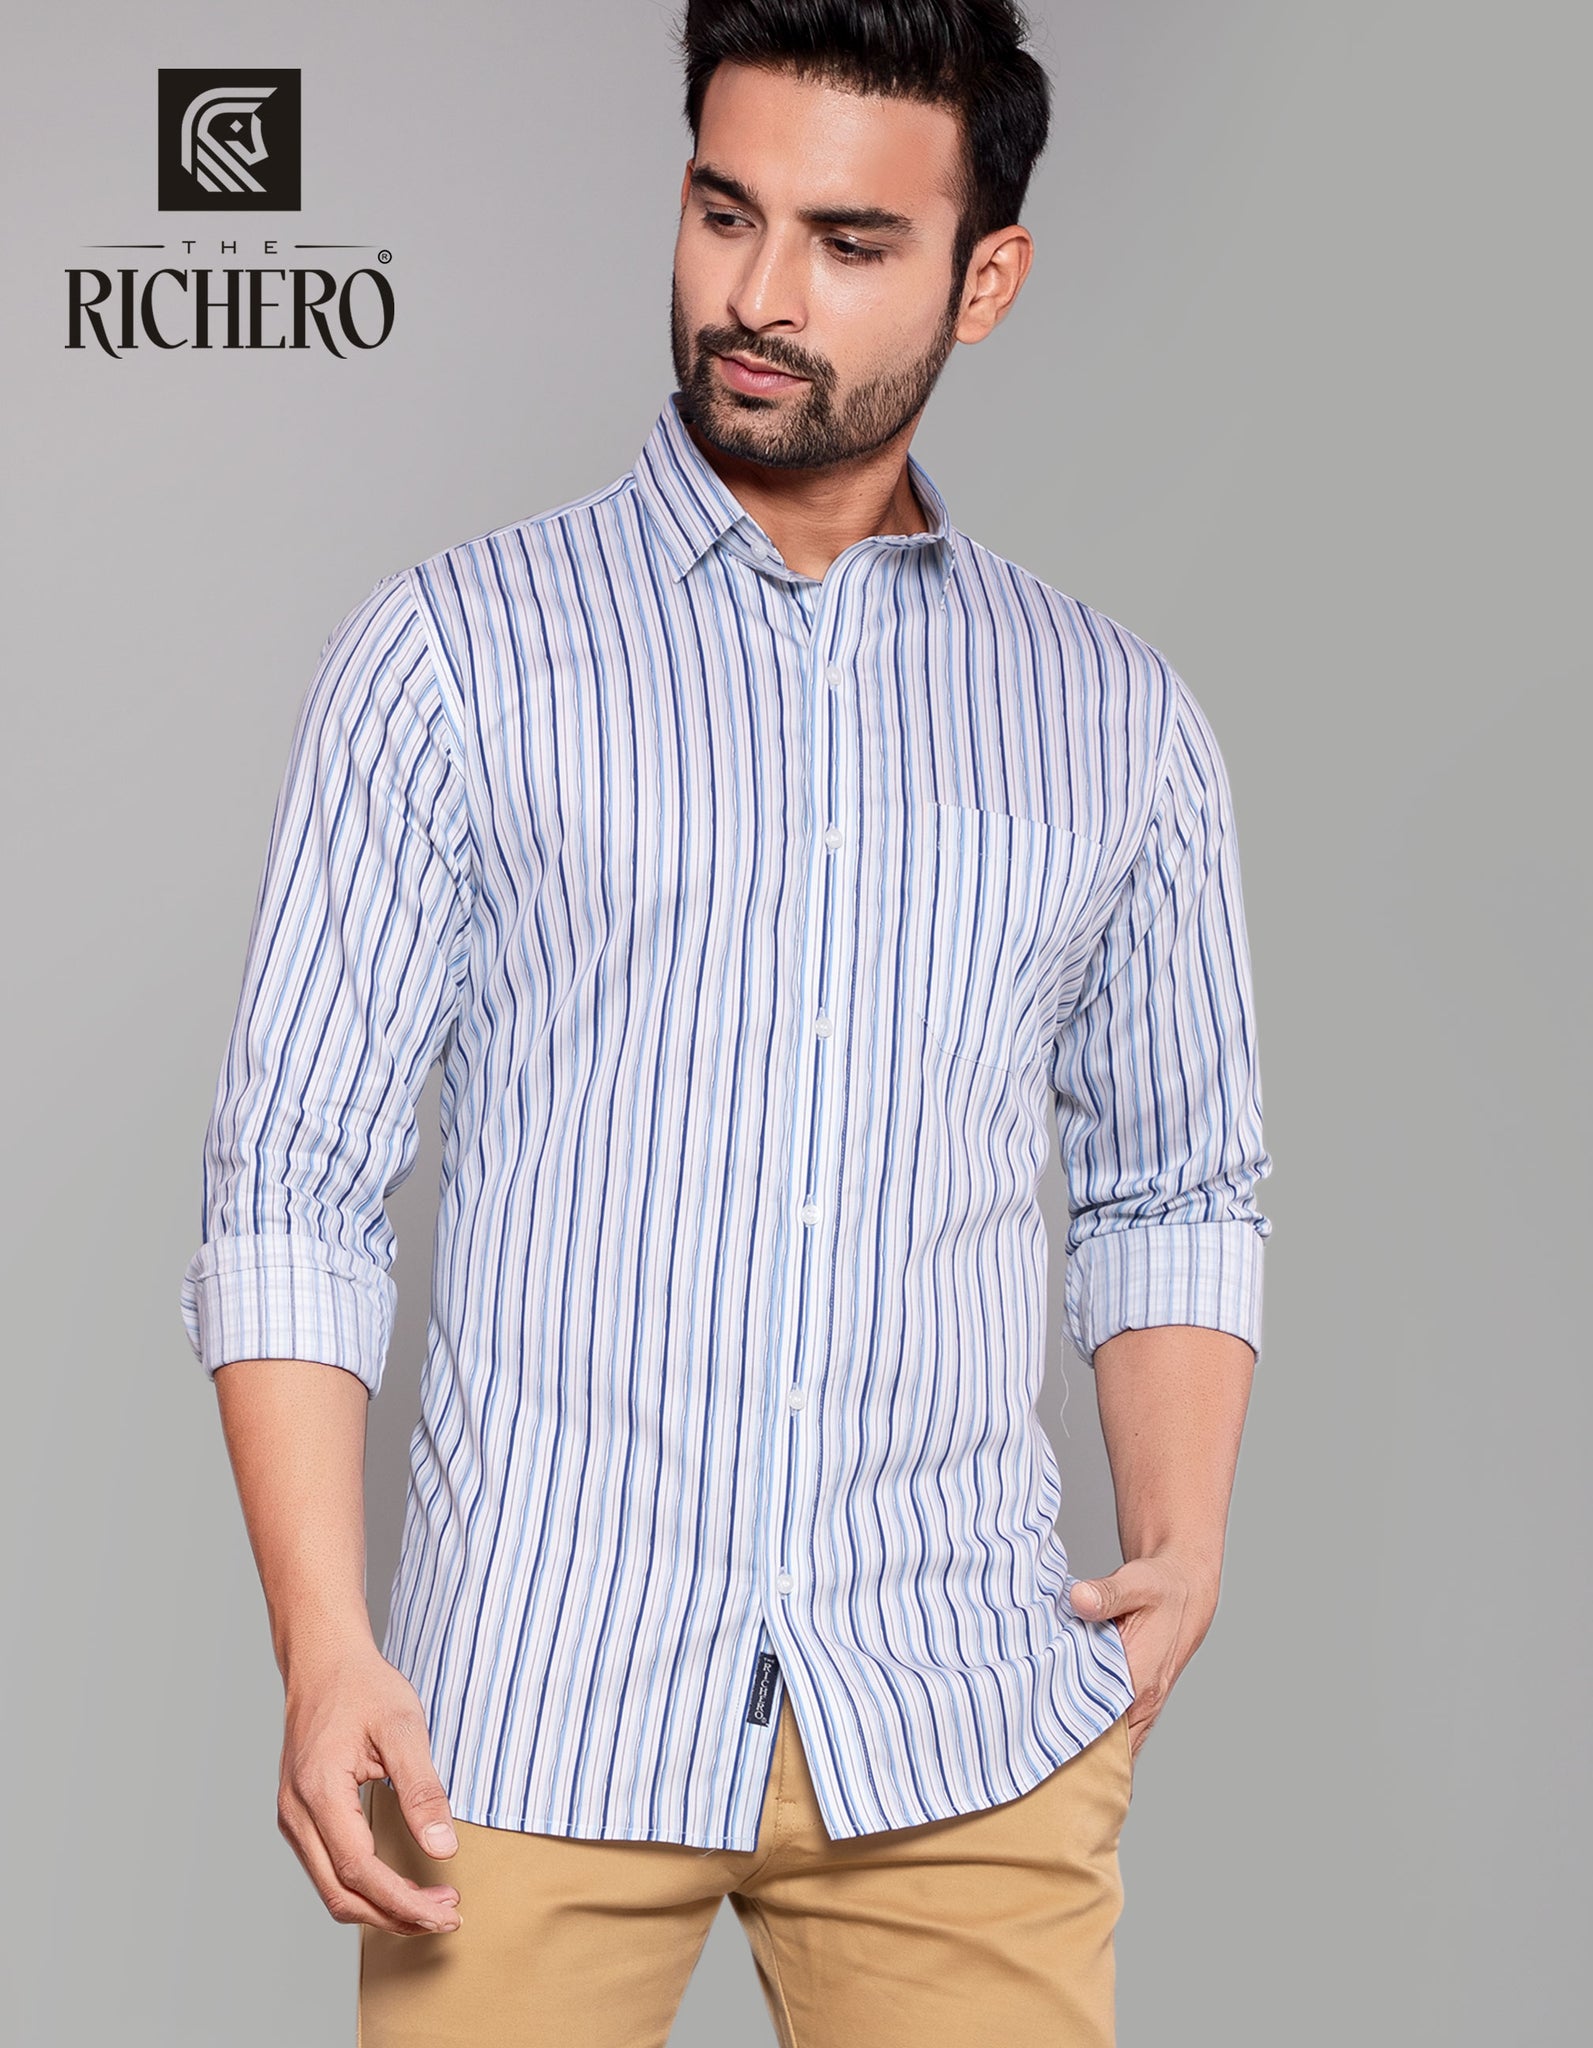 White and blue stripes lining shirt